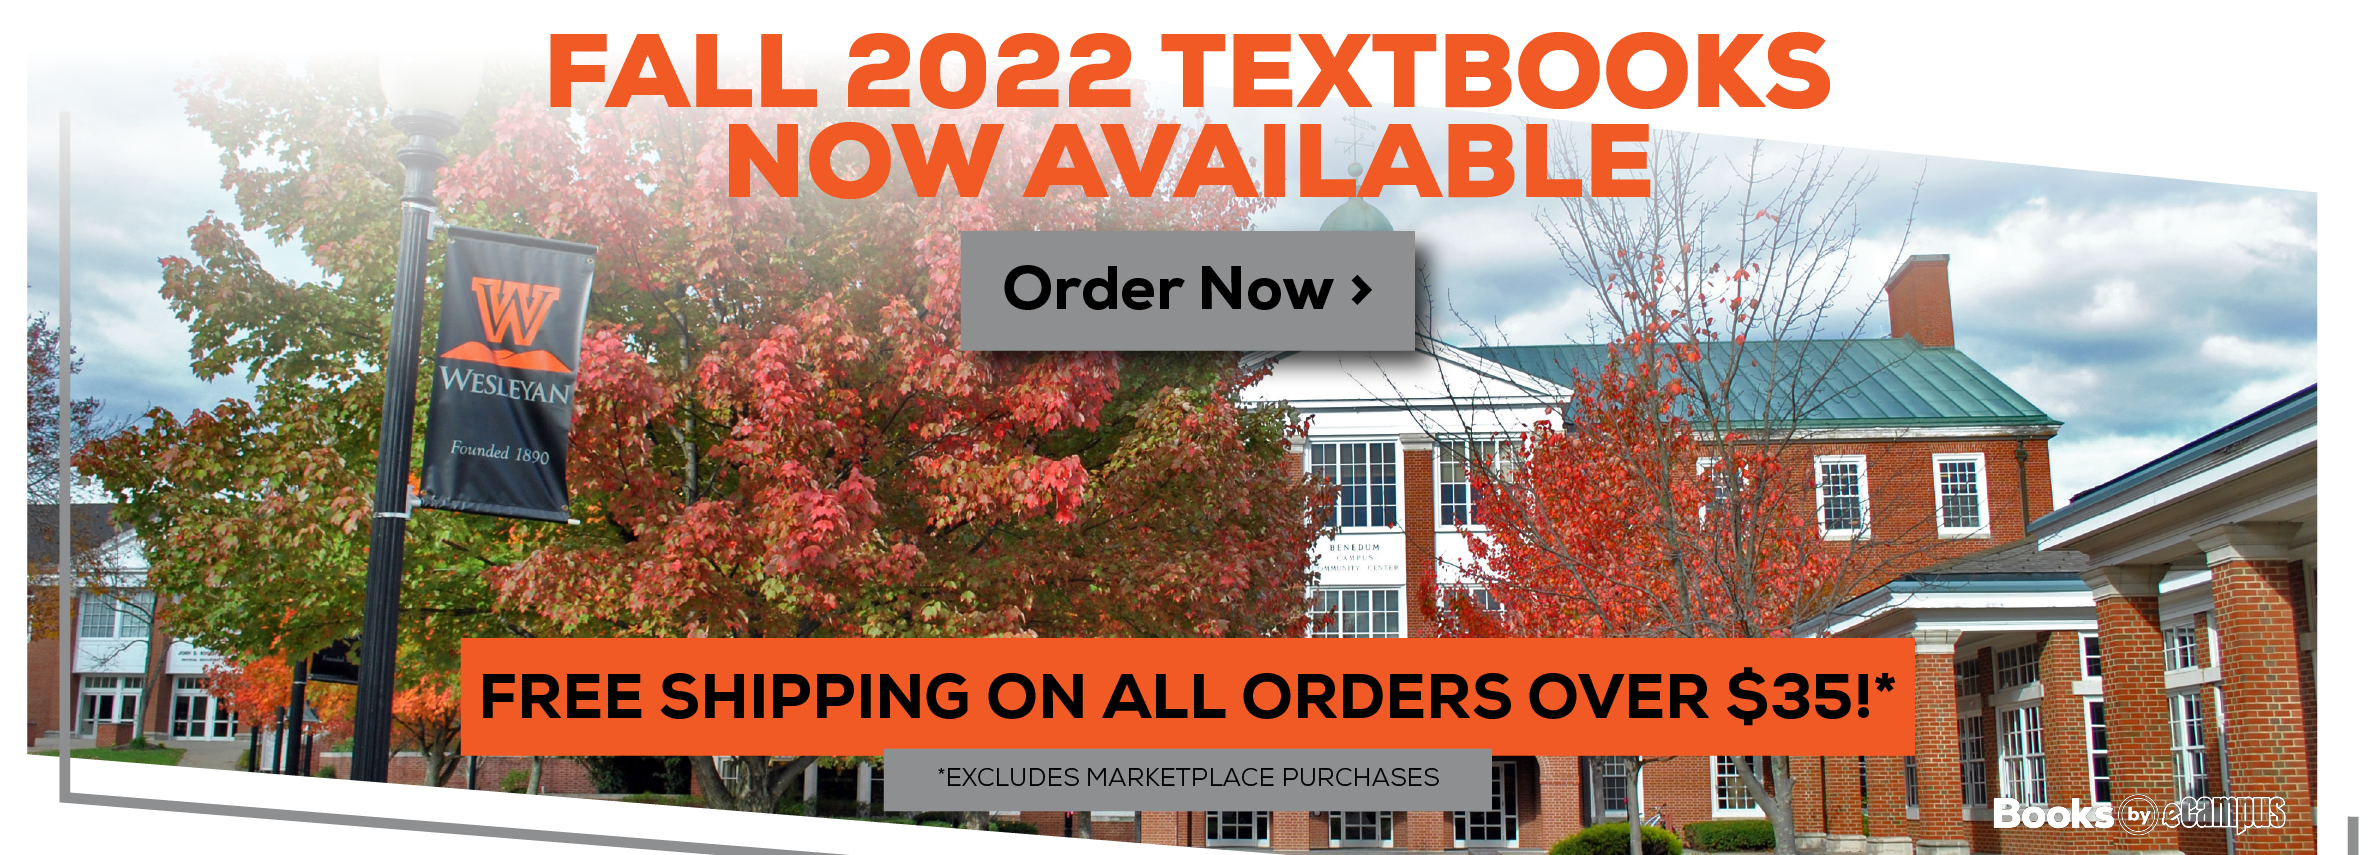 Fall 2022 Textbooks now available. Order now. Free shipping on orders over $35!